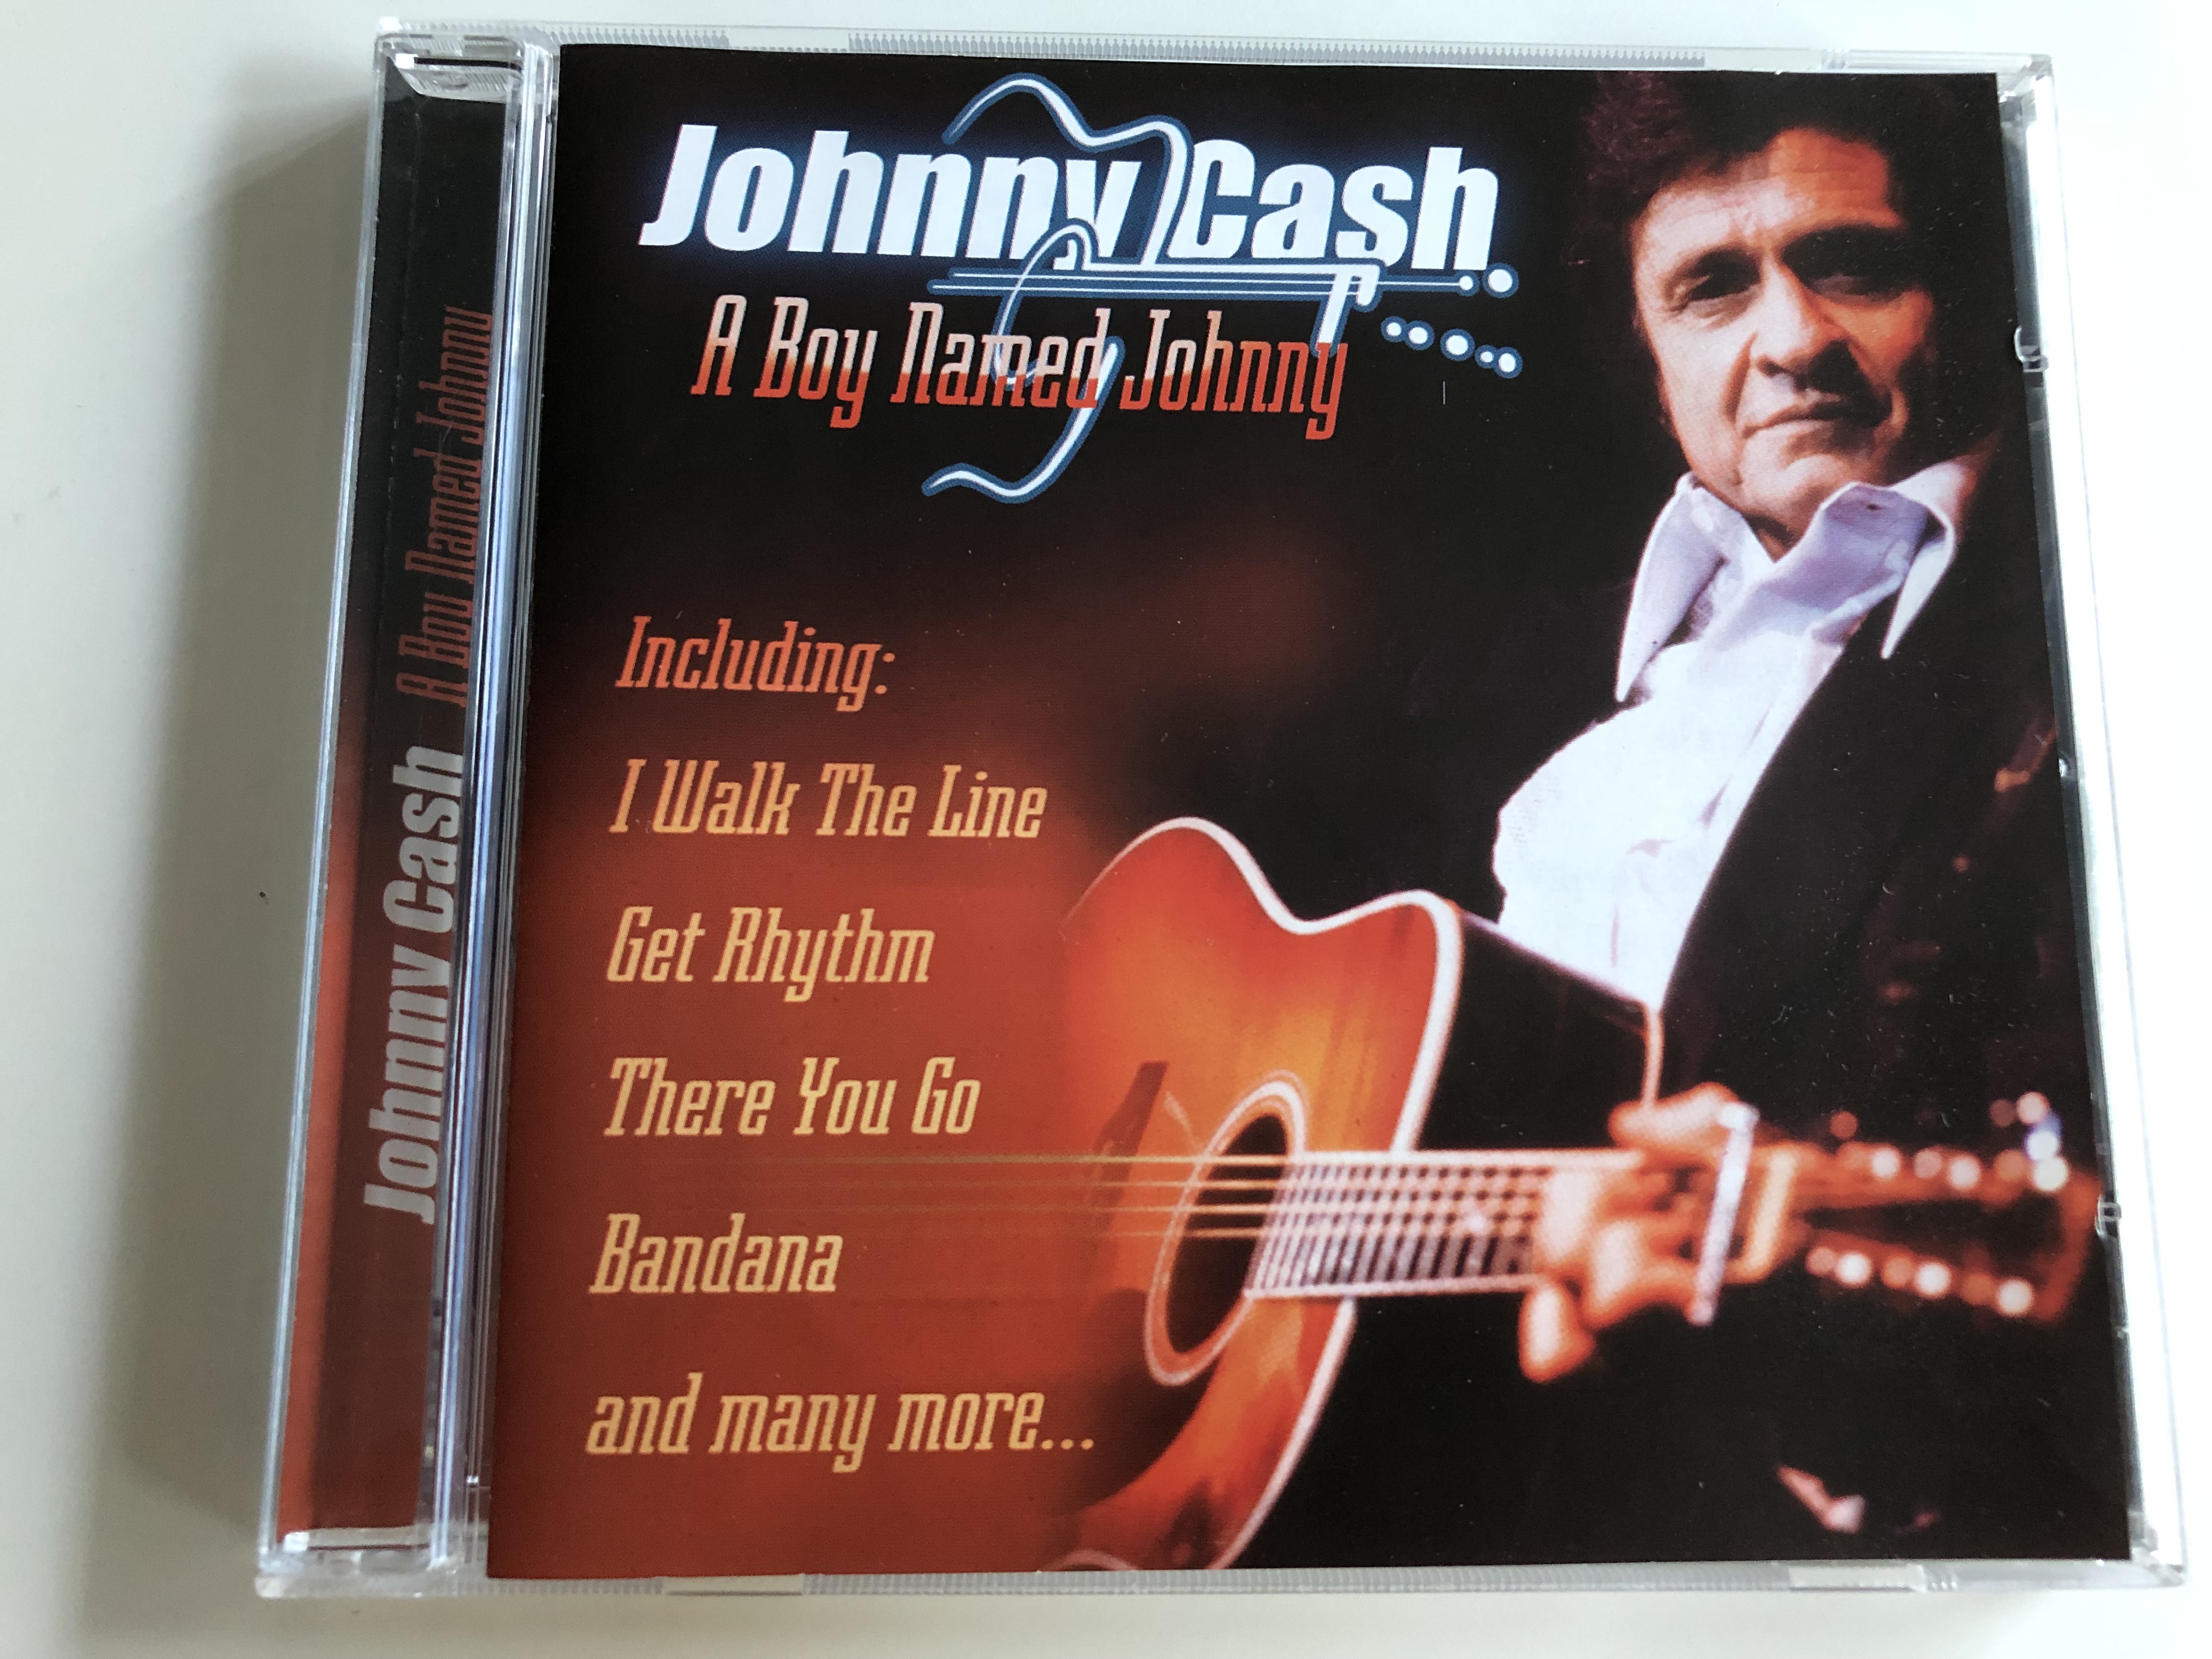 johnny-cash-a-boy-named-johnny-including-i-walk-the-line-get-rhythm-there-you-go-bandana-and-many-more...-audio-cd-2001-apwcd-1164-1-.jpg